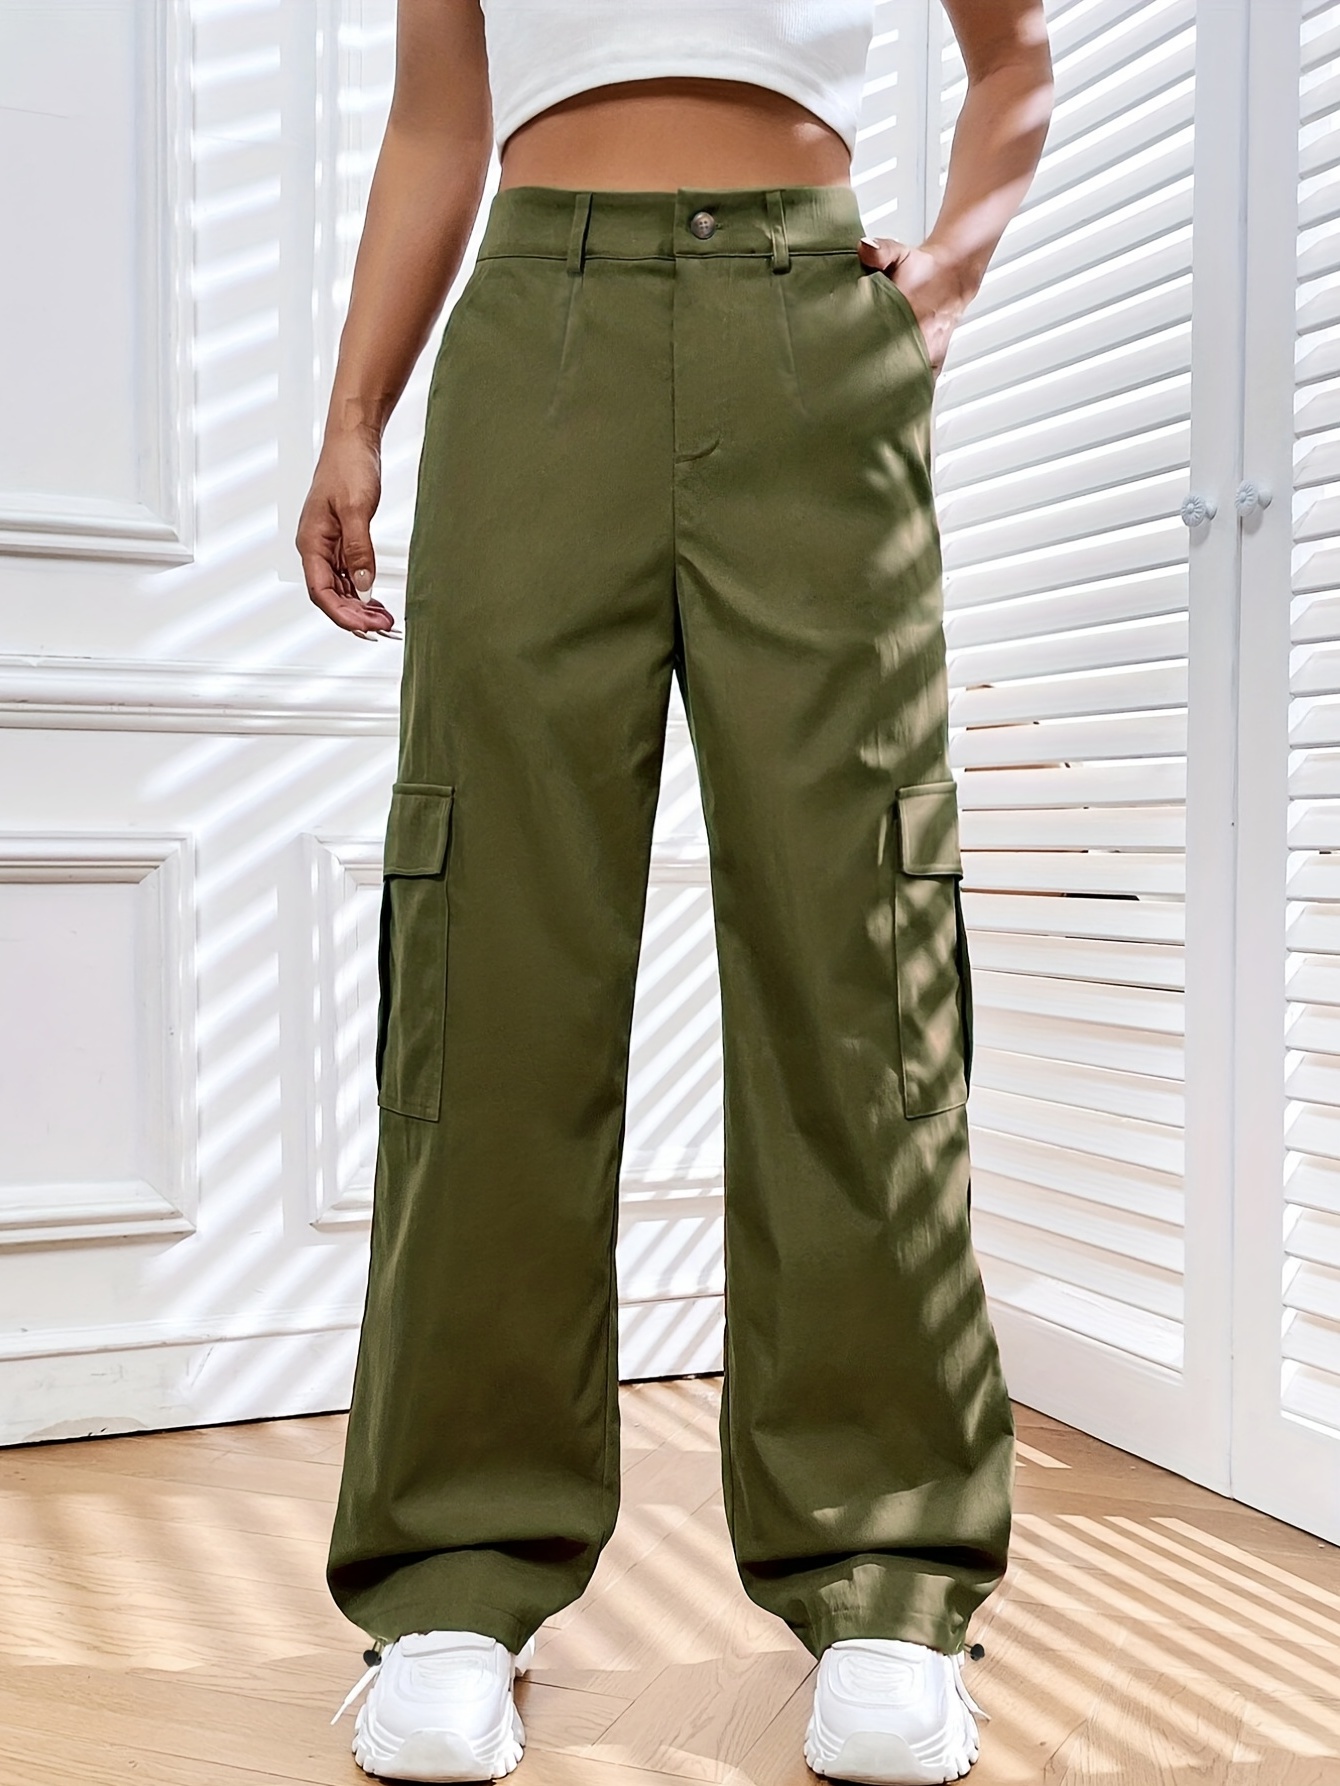 Tdoqot Women's Cargo Pants- with Pockets High weight Casual Fashion  Straight Leg Pants Brown Size M 